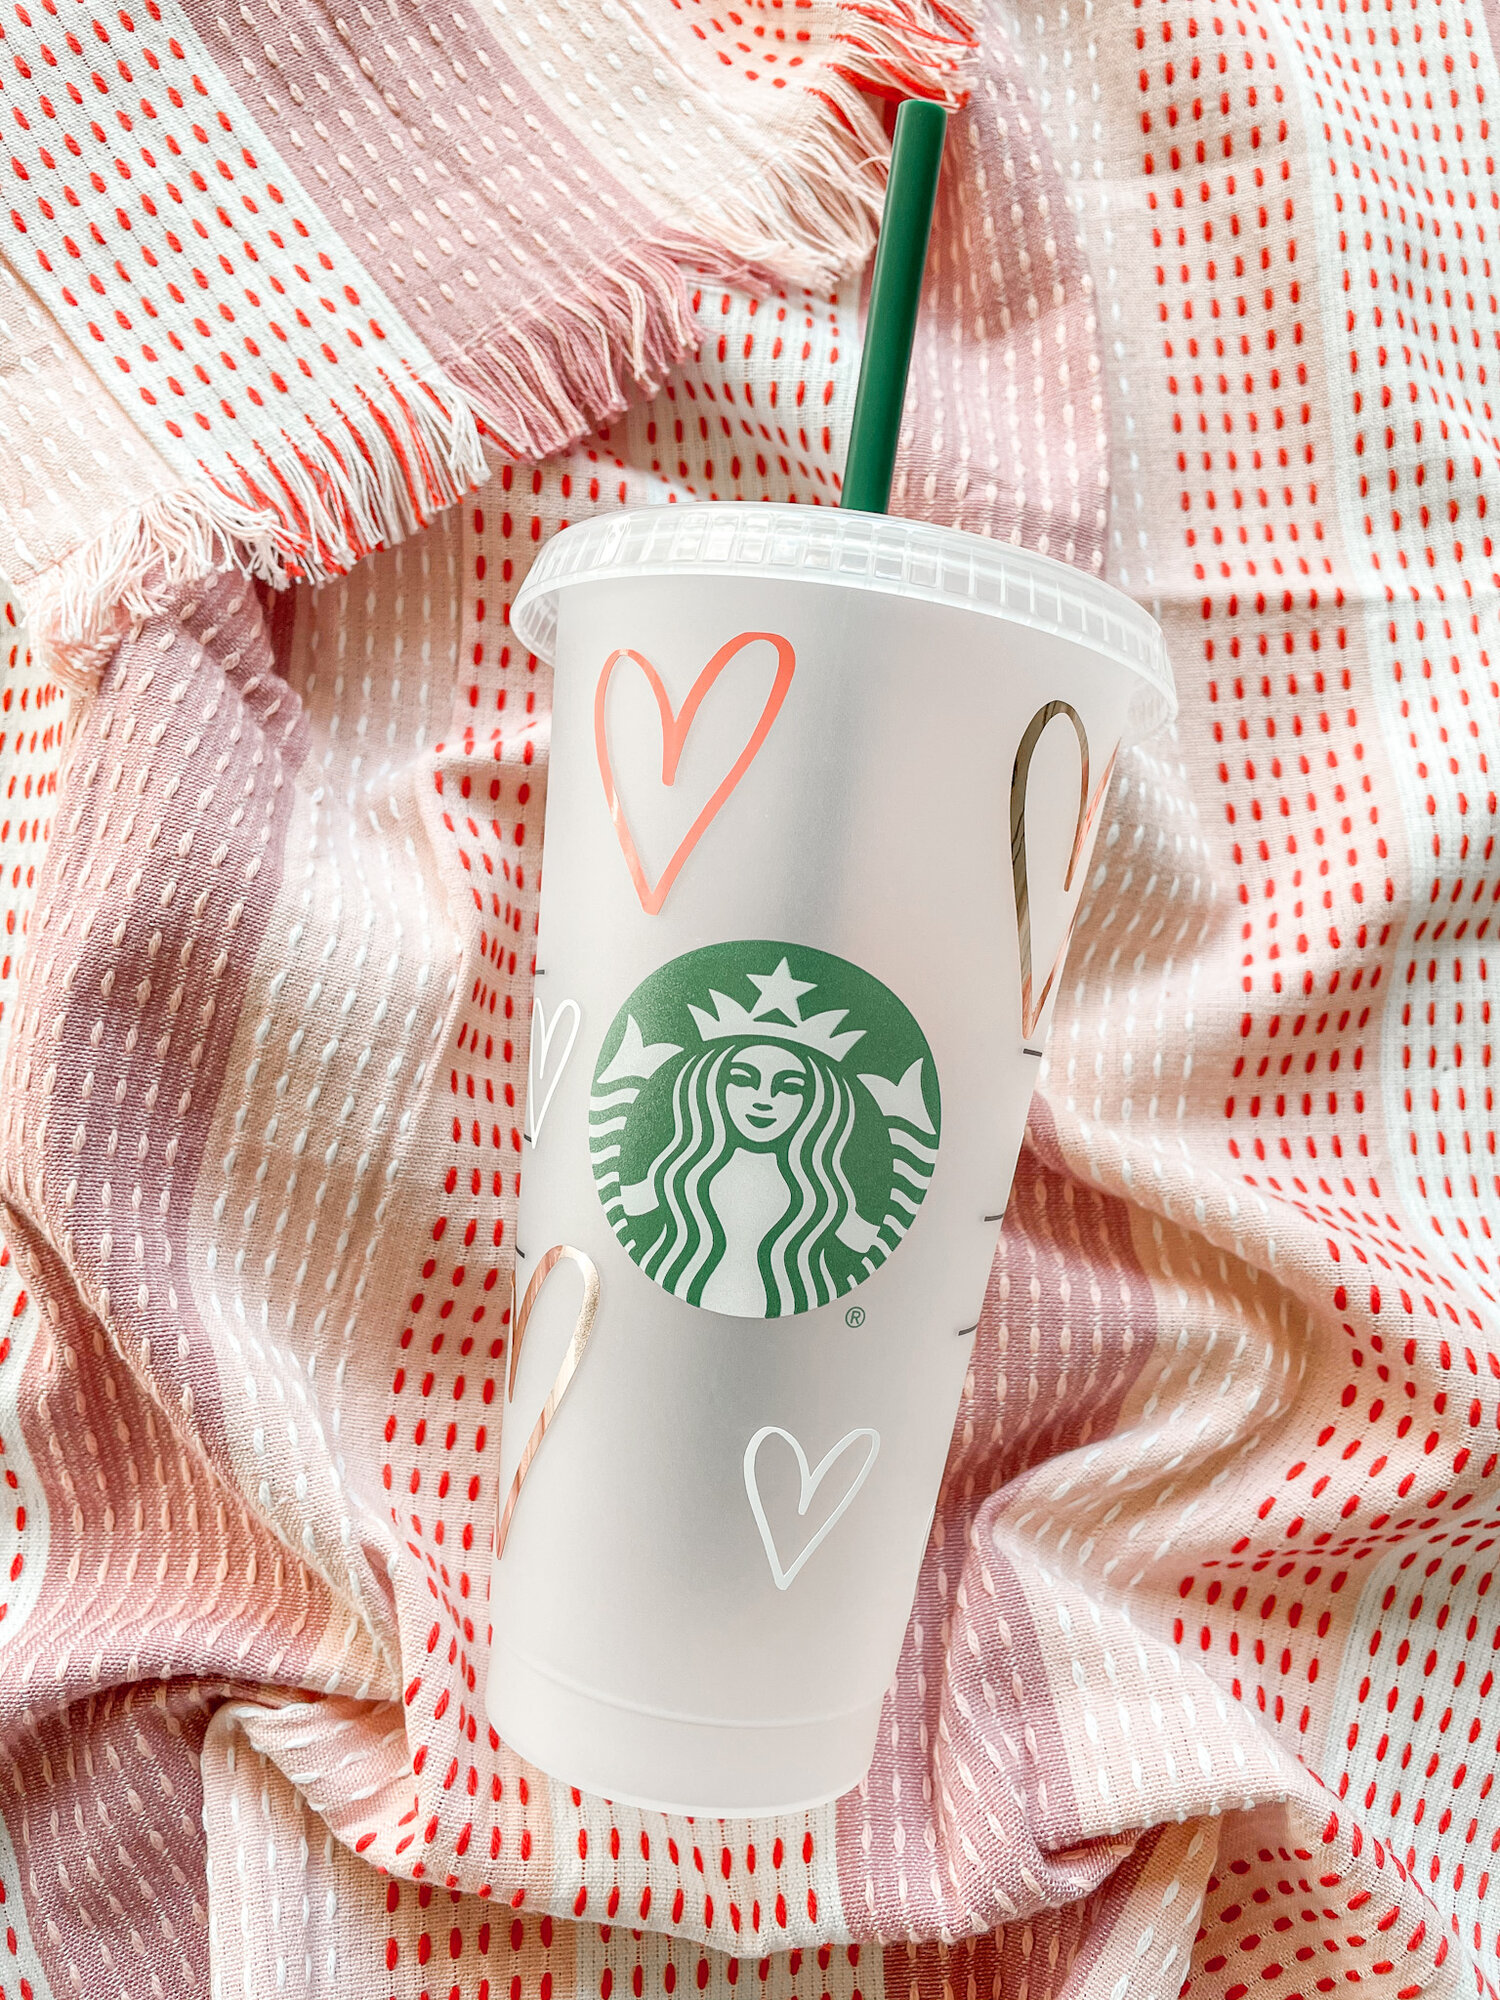 DIY Personalized Starbucks Cup Wrap  How To Layer A Vinyl Decal Wrap 